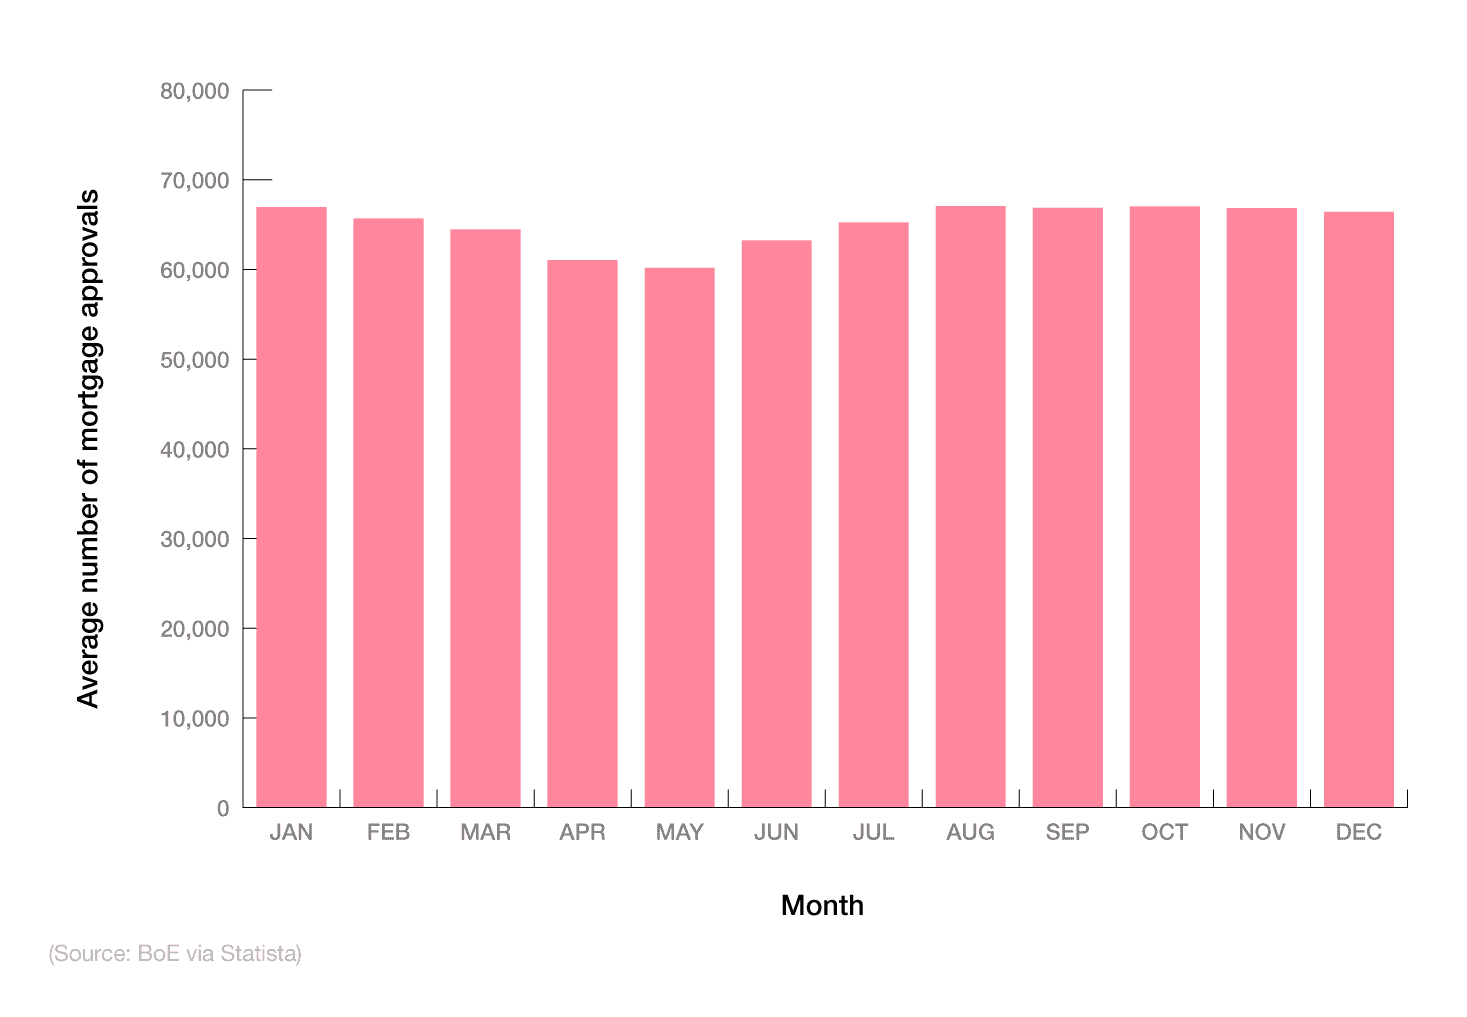 Bar chart showing average UK monthly house purchase approvals between 2007 and 2023